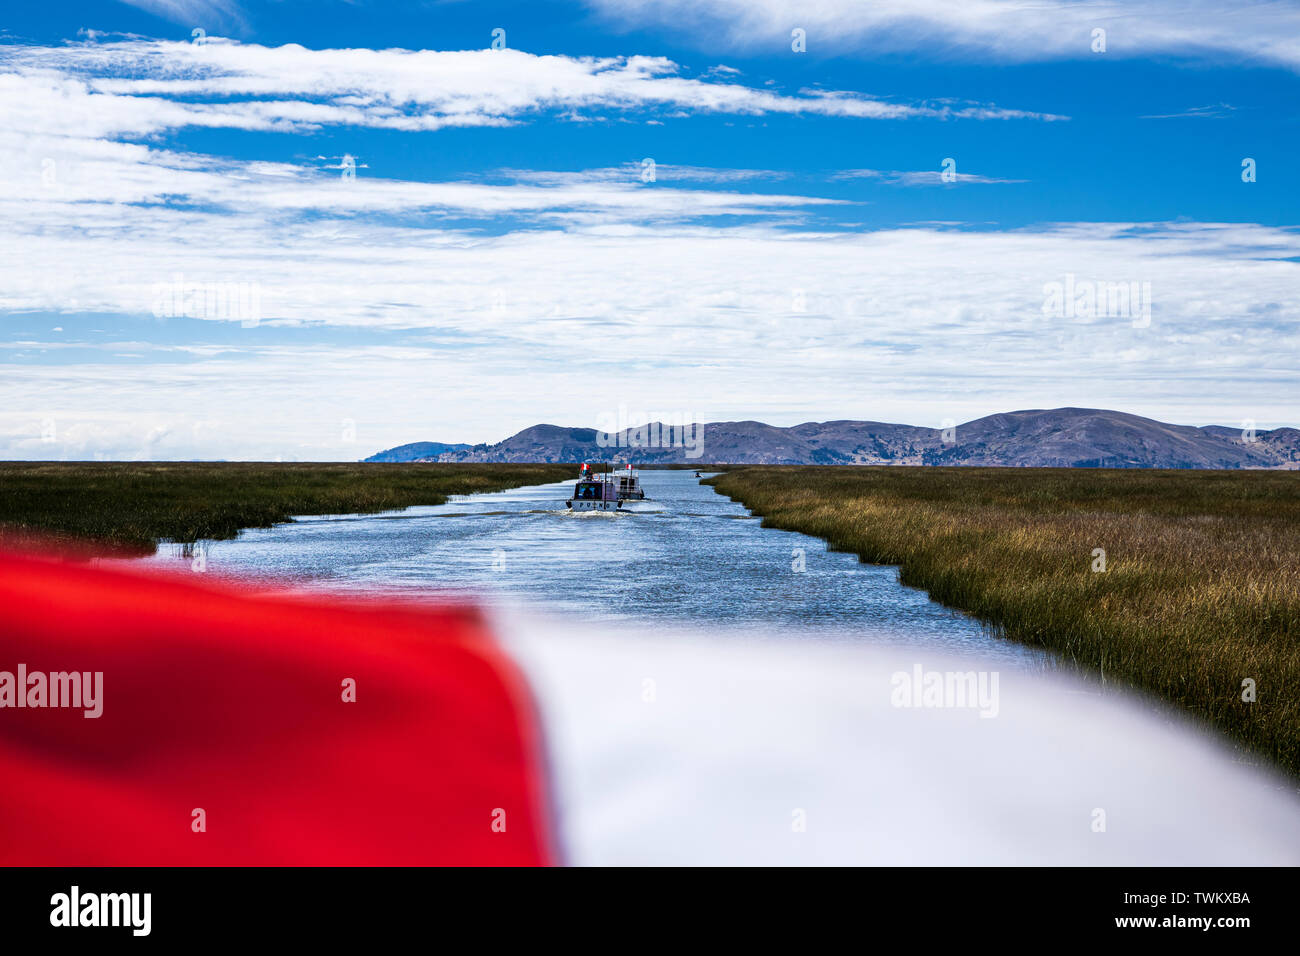 Red and white Peruvian national flag flying on a boat on Lake Titicaca, Peru, South America Stock Photo